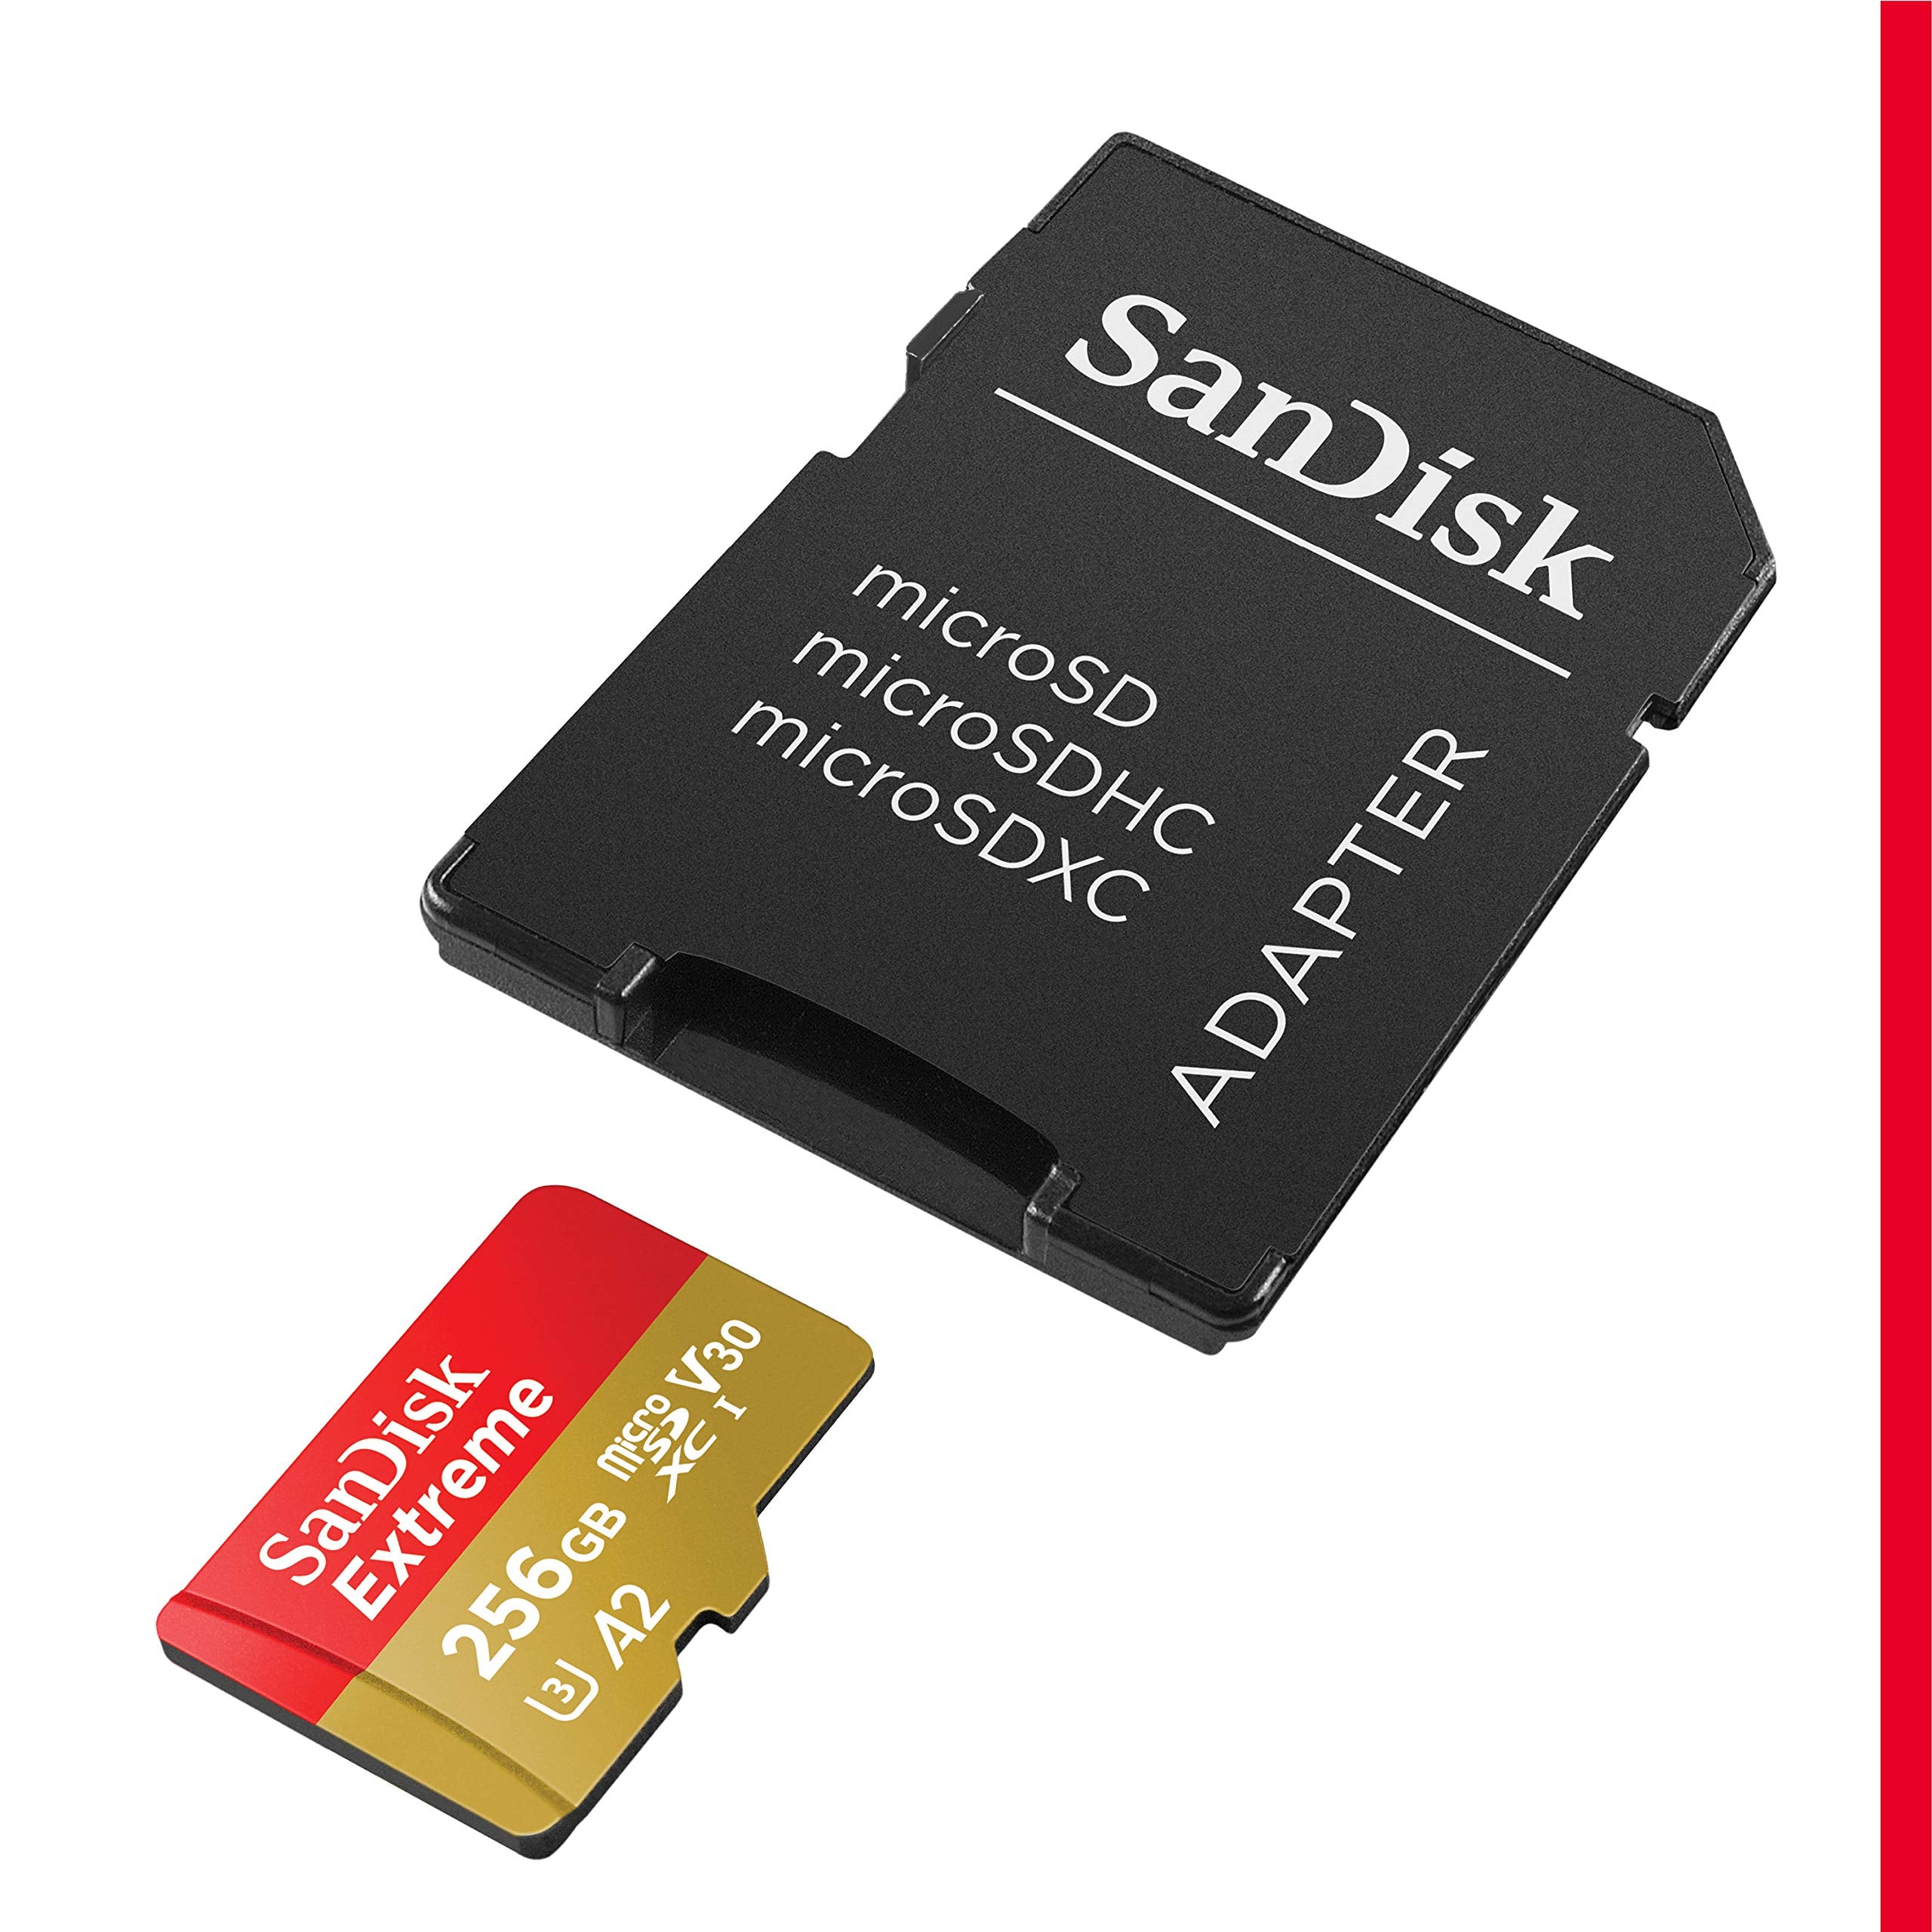 SanDisk Extreme 256 GB microSDXC Memory Card + SD Adapter with A2 App Performance + Rescue Pro Deluxe, Up to 160 MB/s, Class 10, UHS-I, U3, V30, Red/Gold